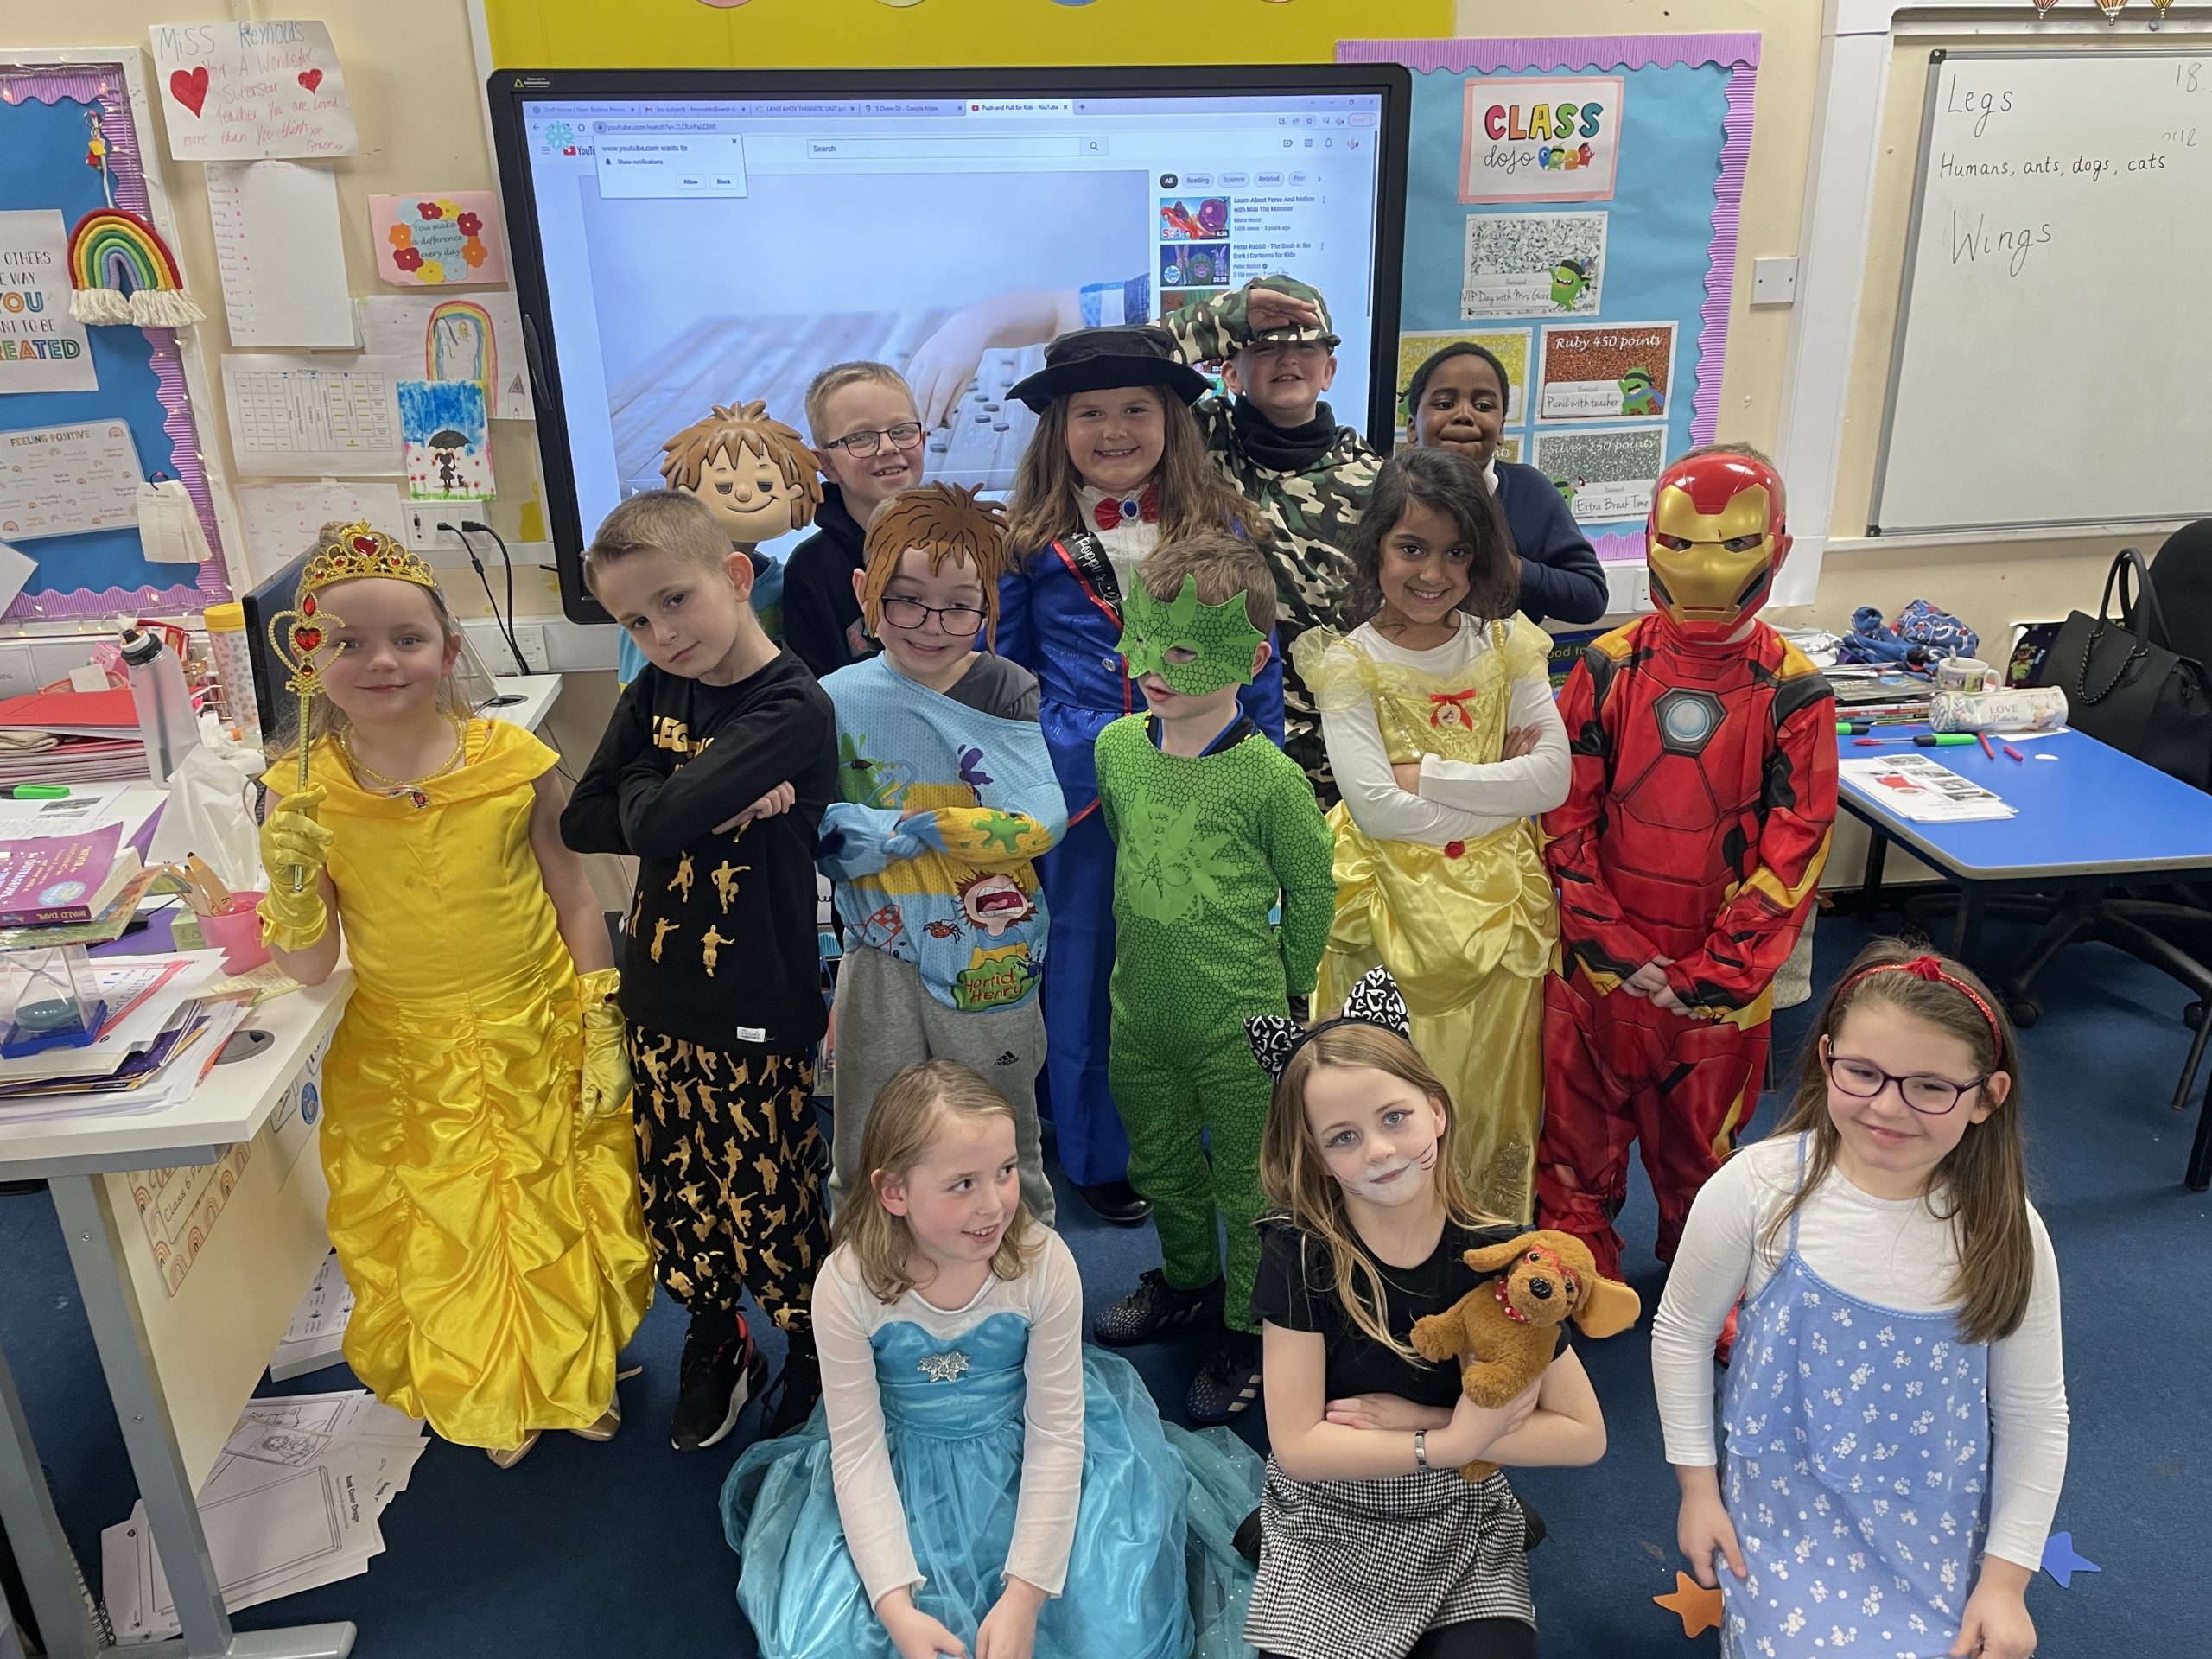 Year 2 dressed up for World Book Day 2022